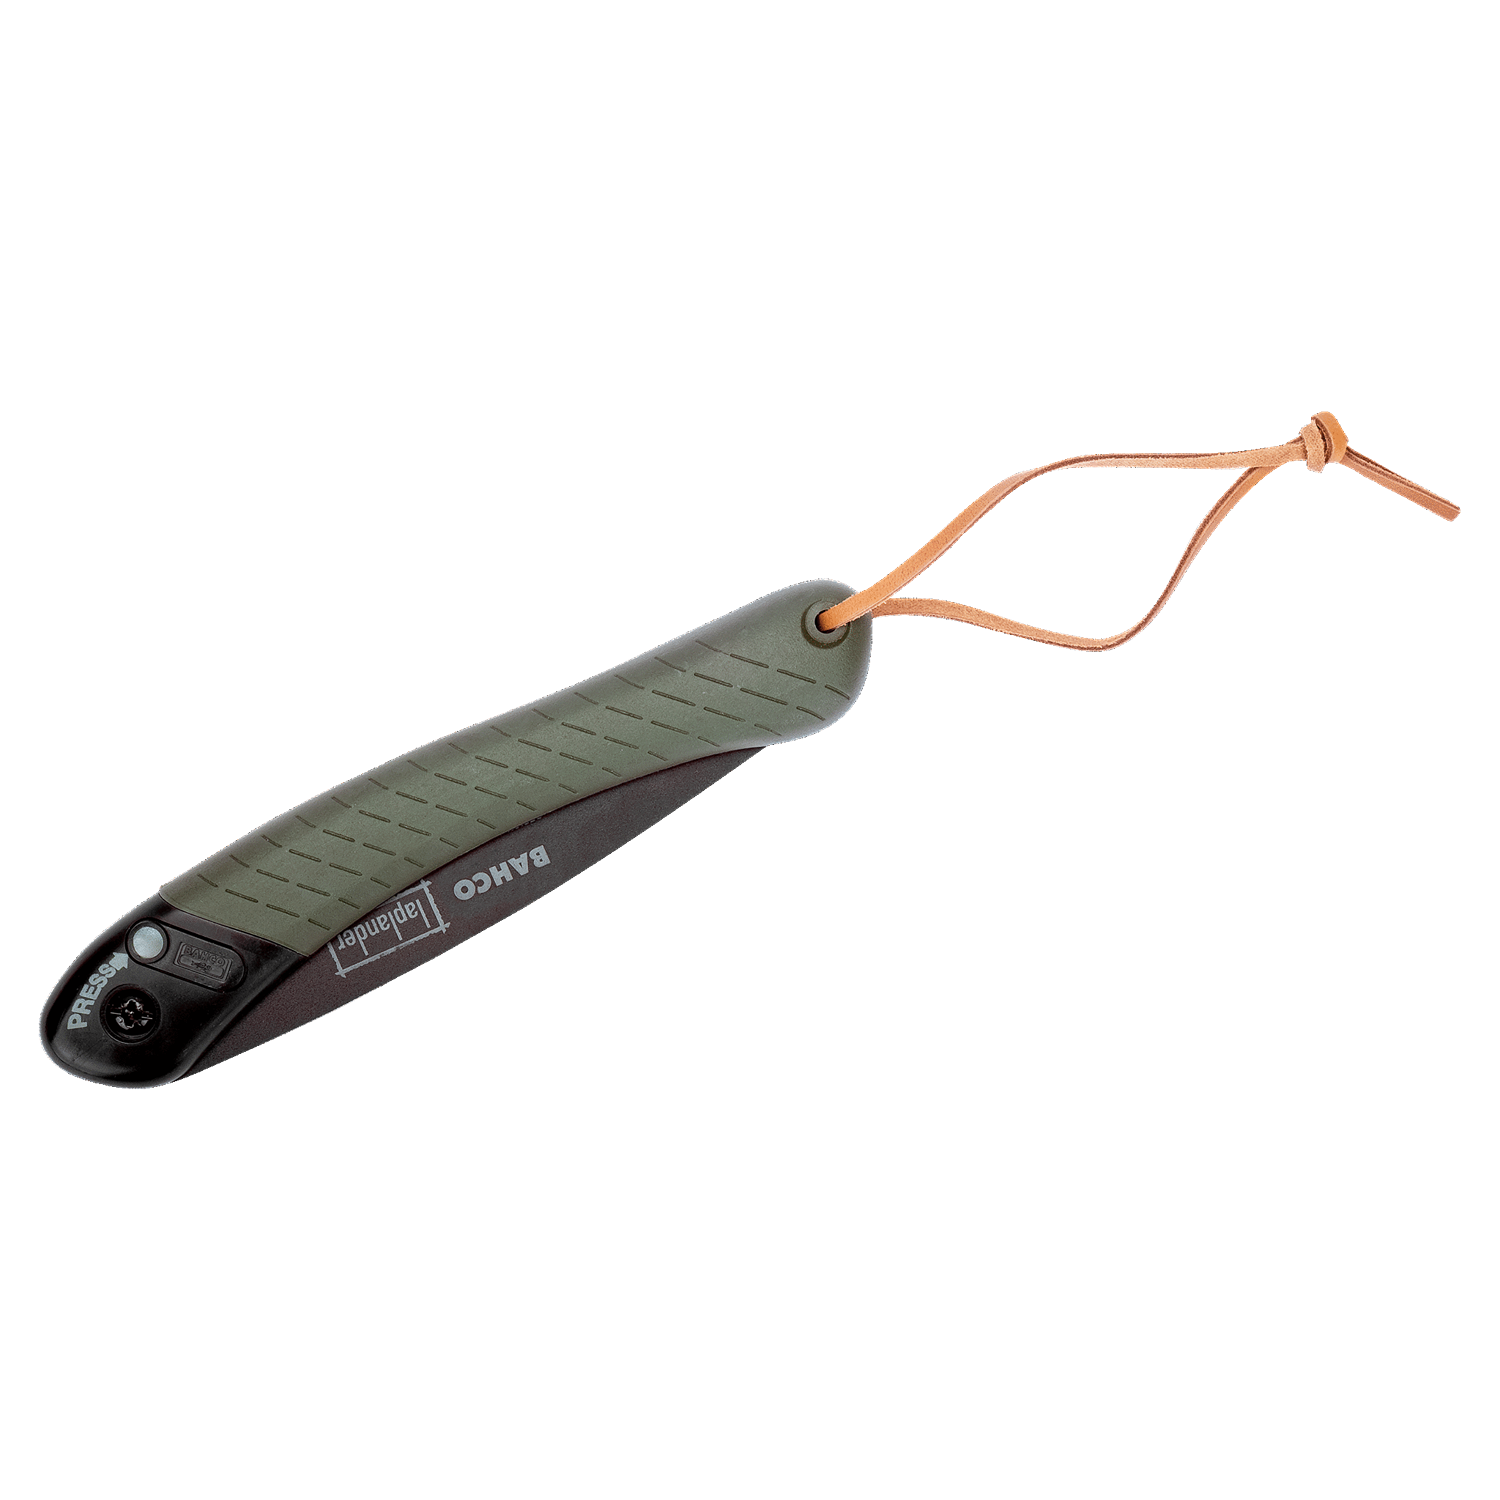 BAHCO 396-LAP Foldable Pruning Saw with Dual- Component Handle - Premium Pruning Saw from BAHCO - Shop now at Yew Aik.